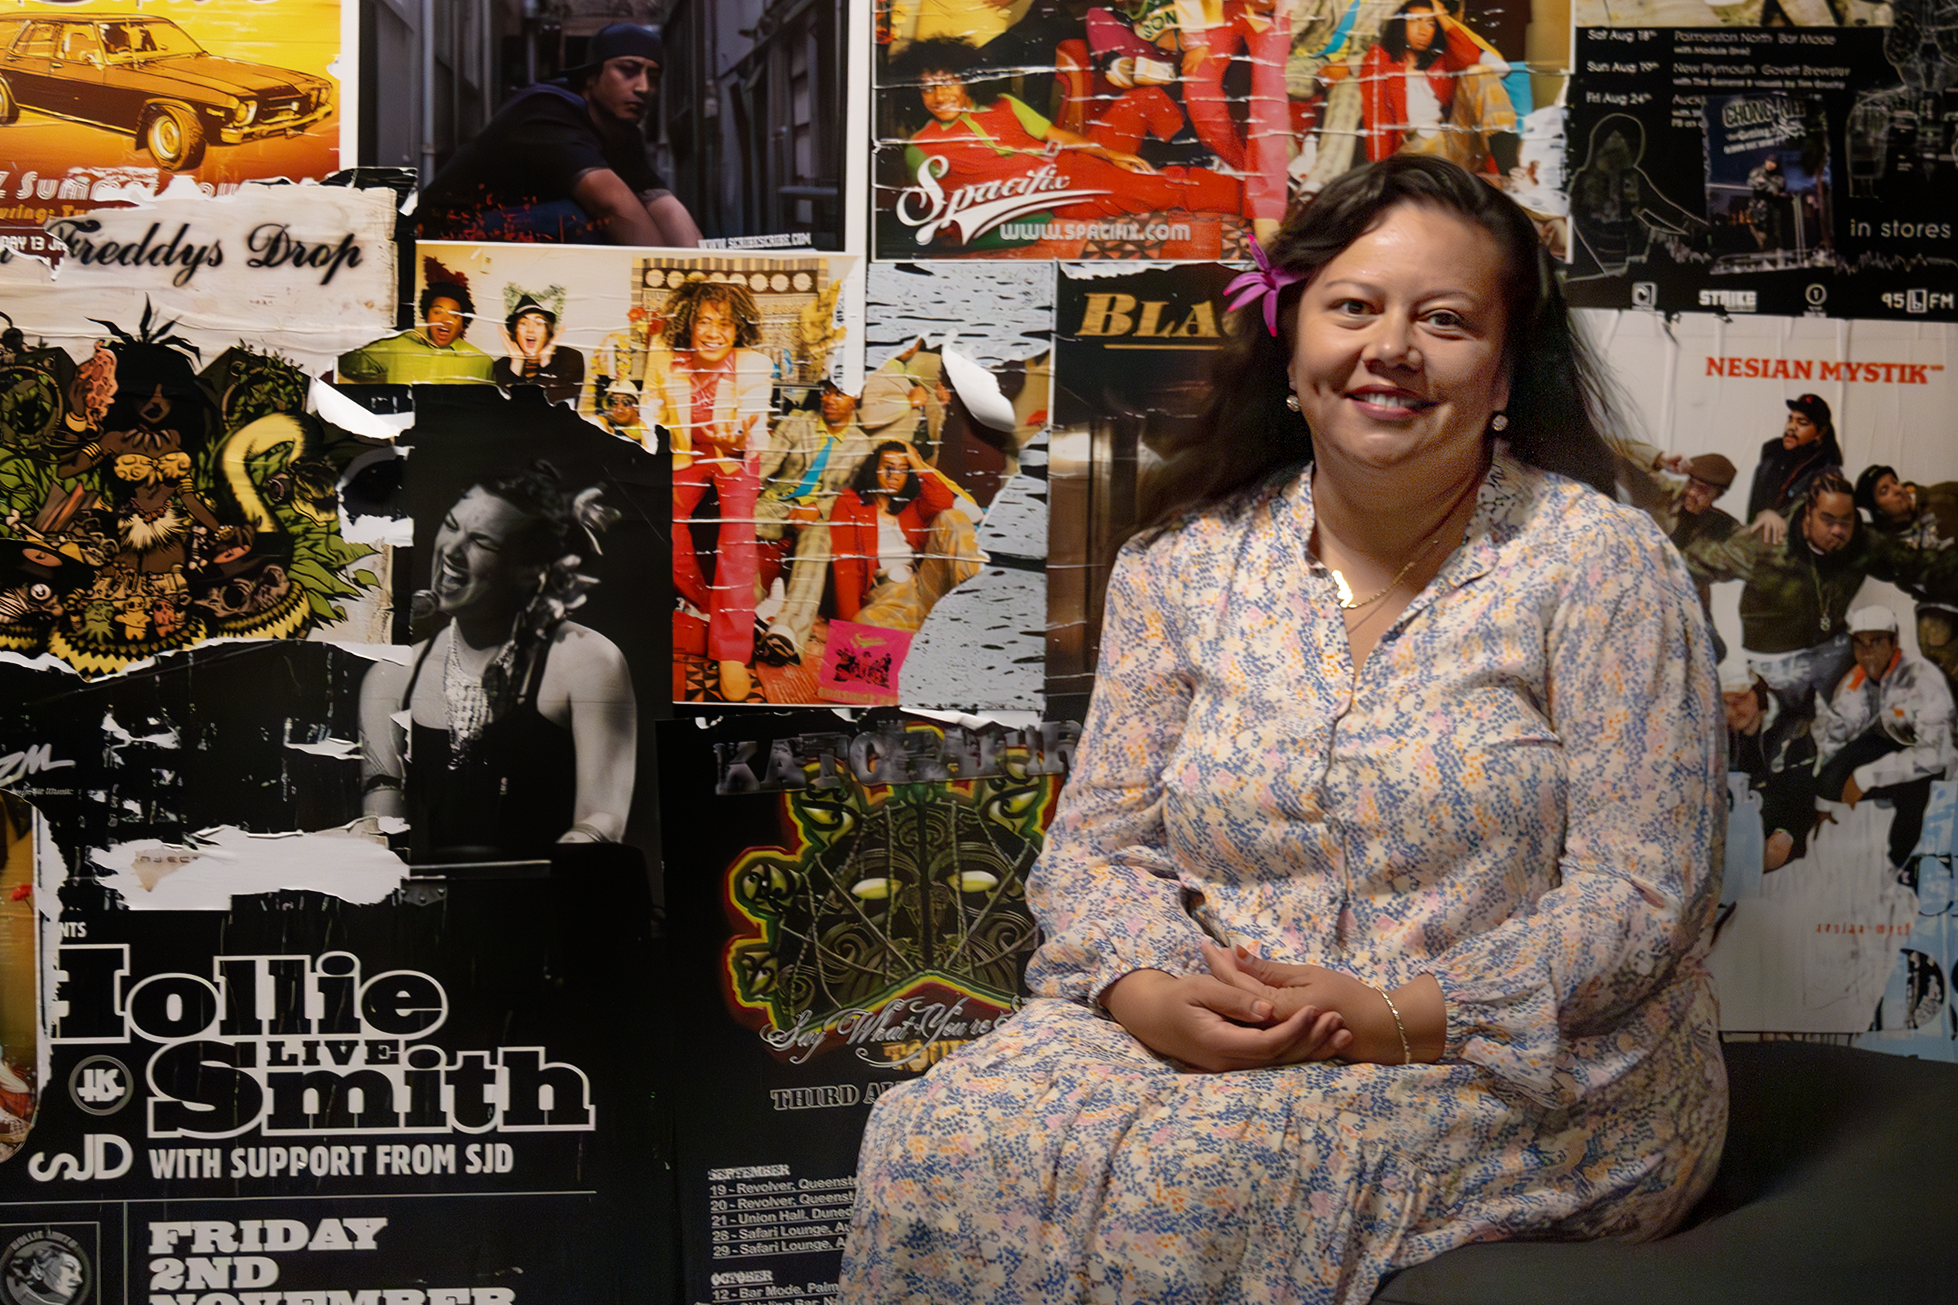 A woman in a light-coloured dress is sitting in front of a wall of music posters. She is posed and smiling at the camera.